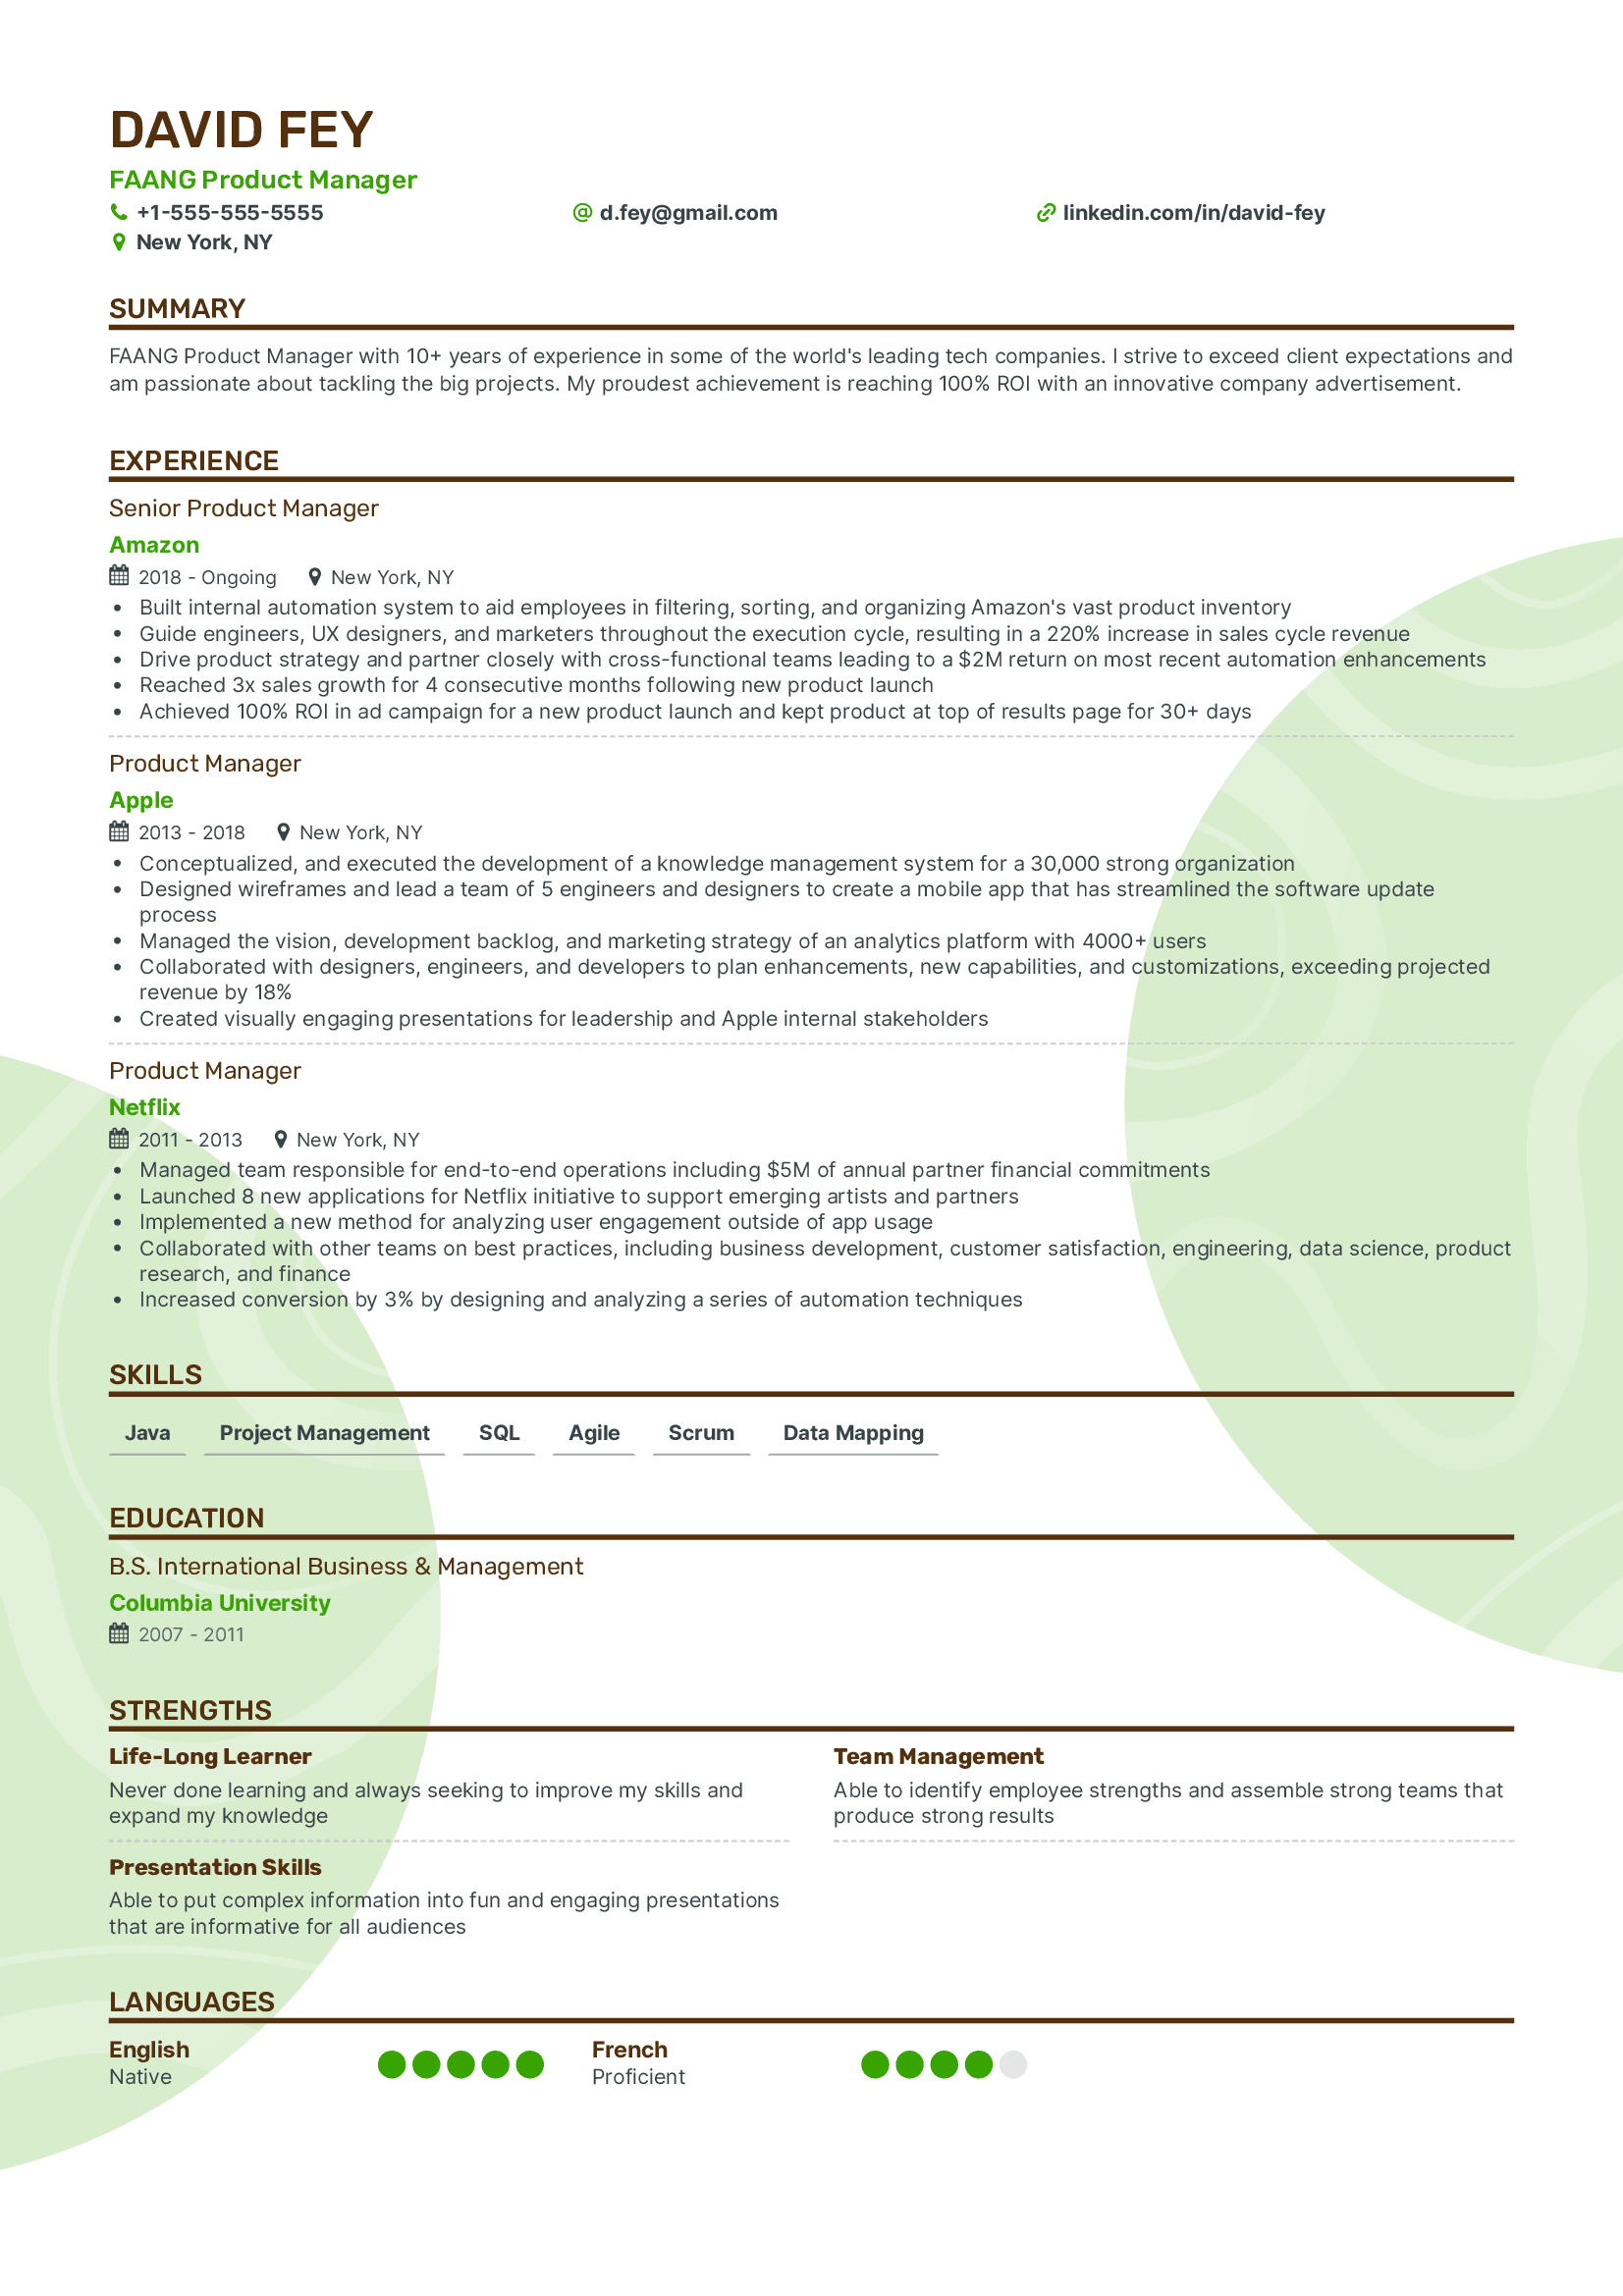 FAANG Product Manager Resume.png